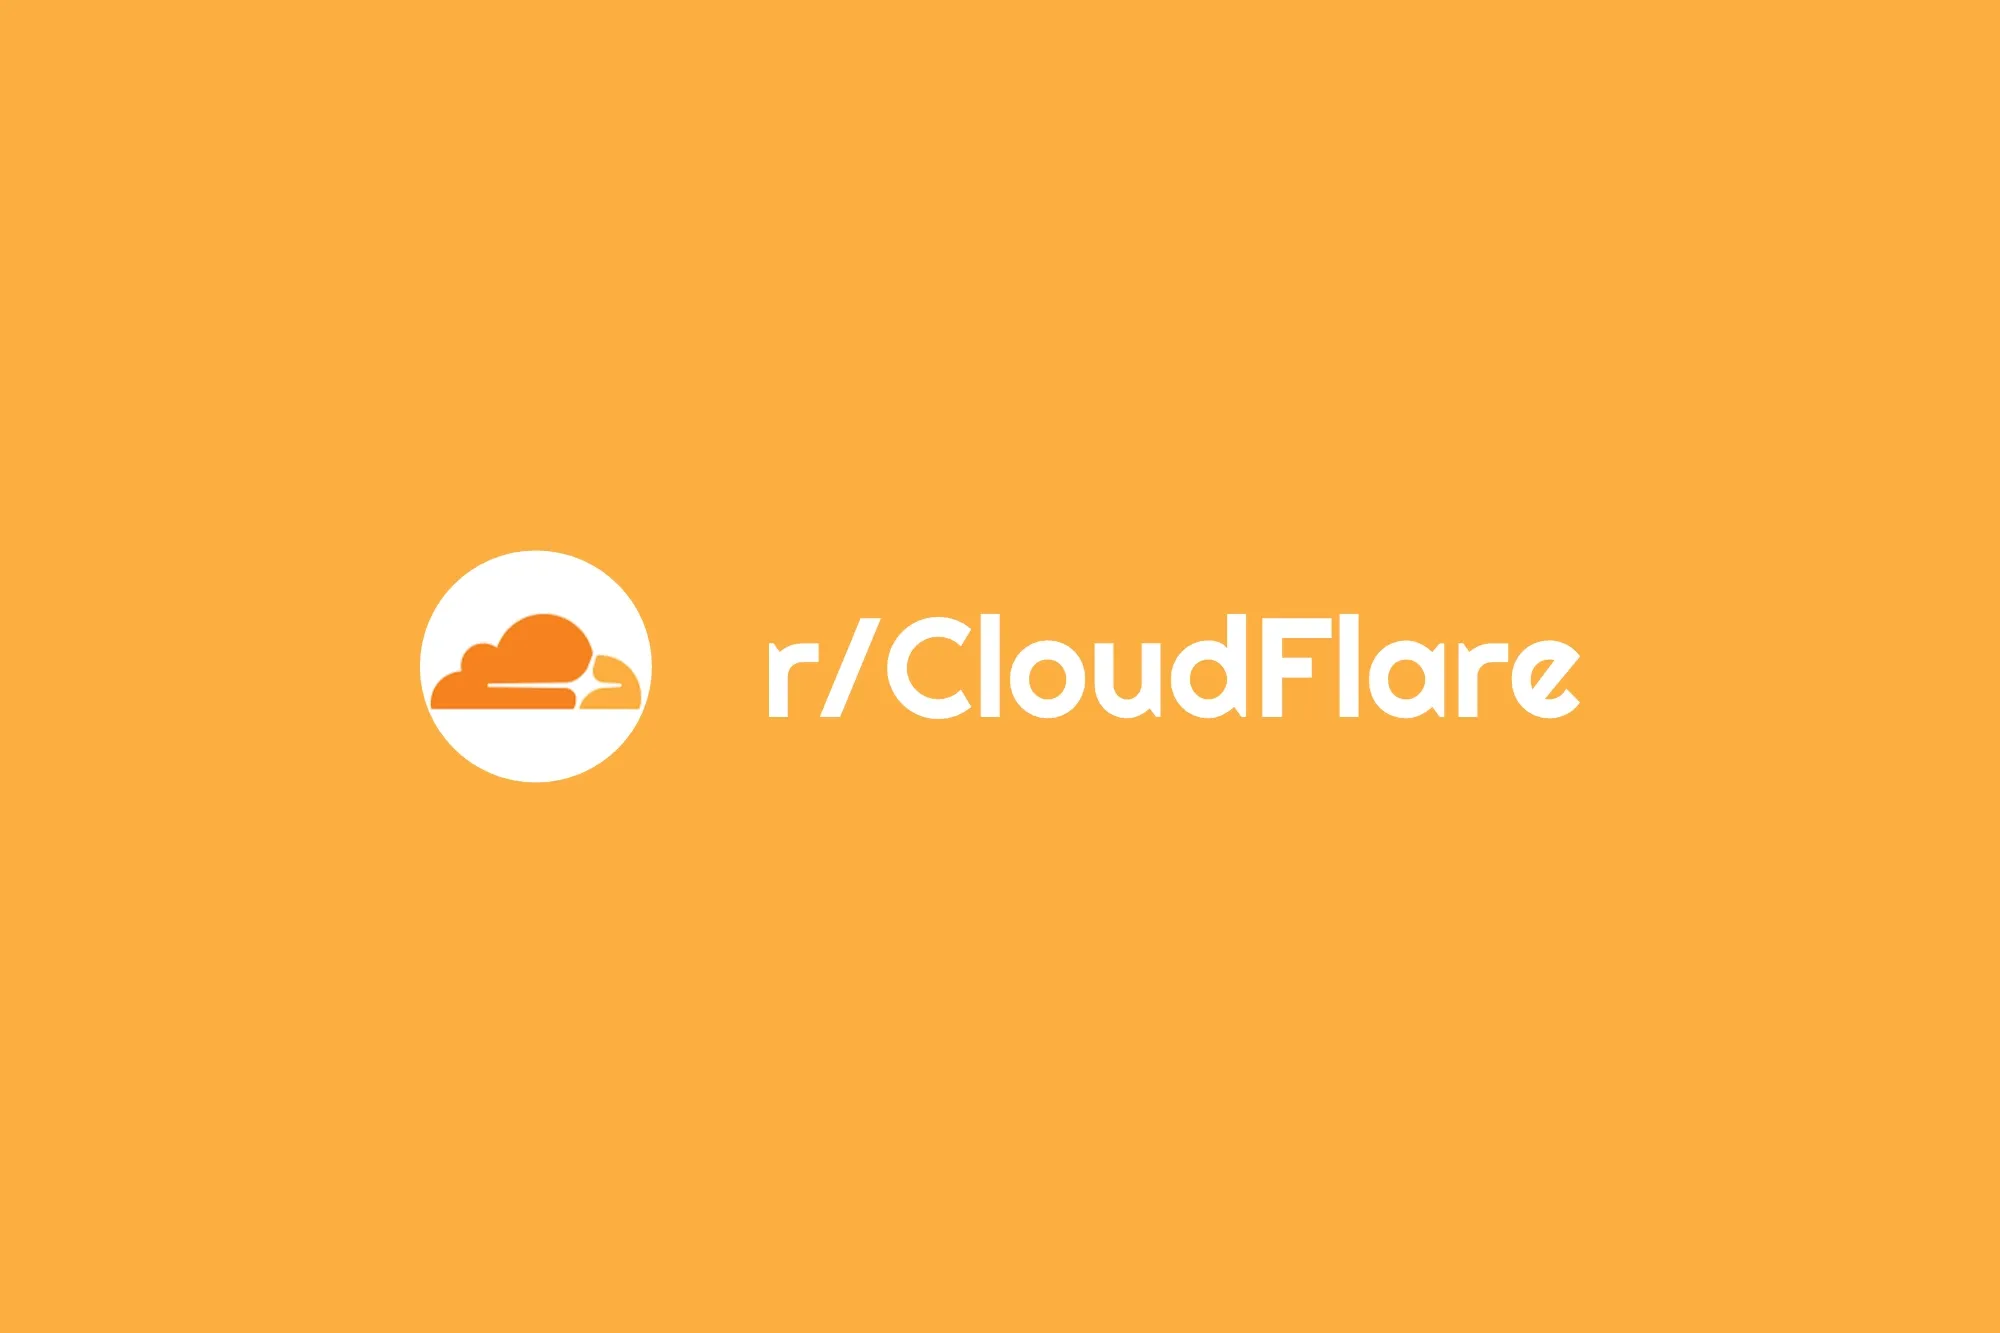 Cloudflare Stickers for Sale | Redbubble